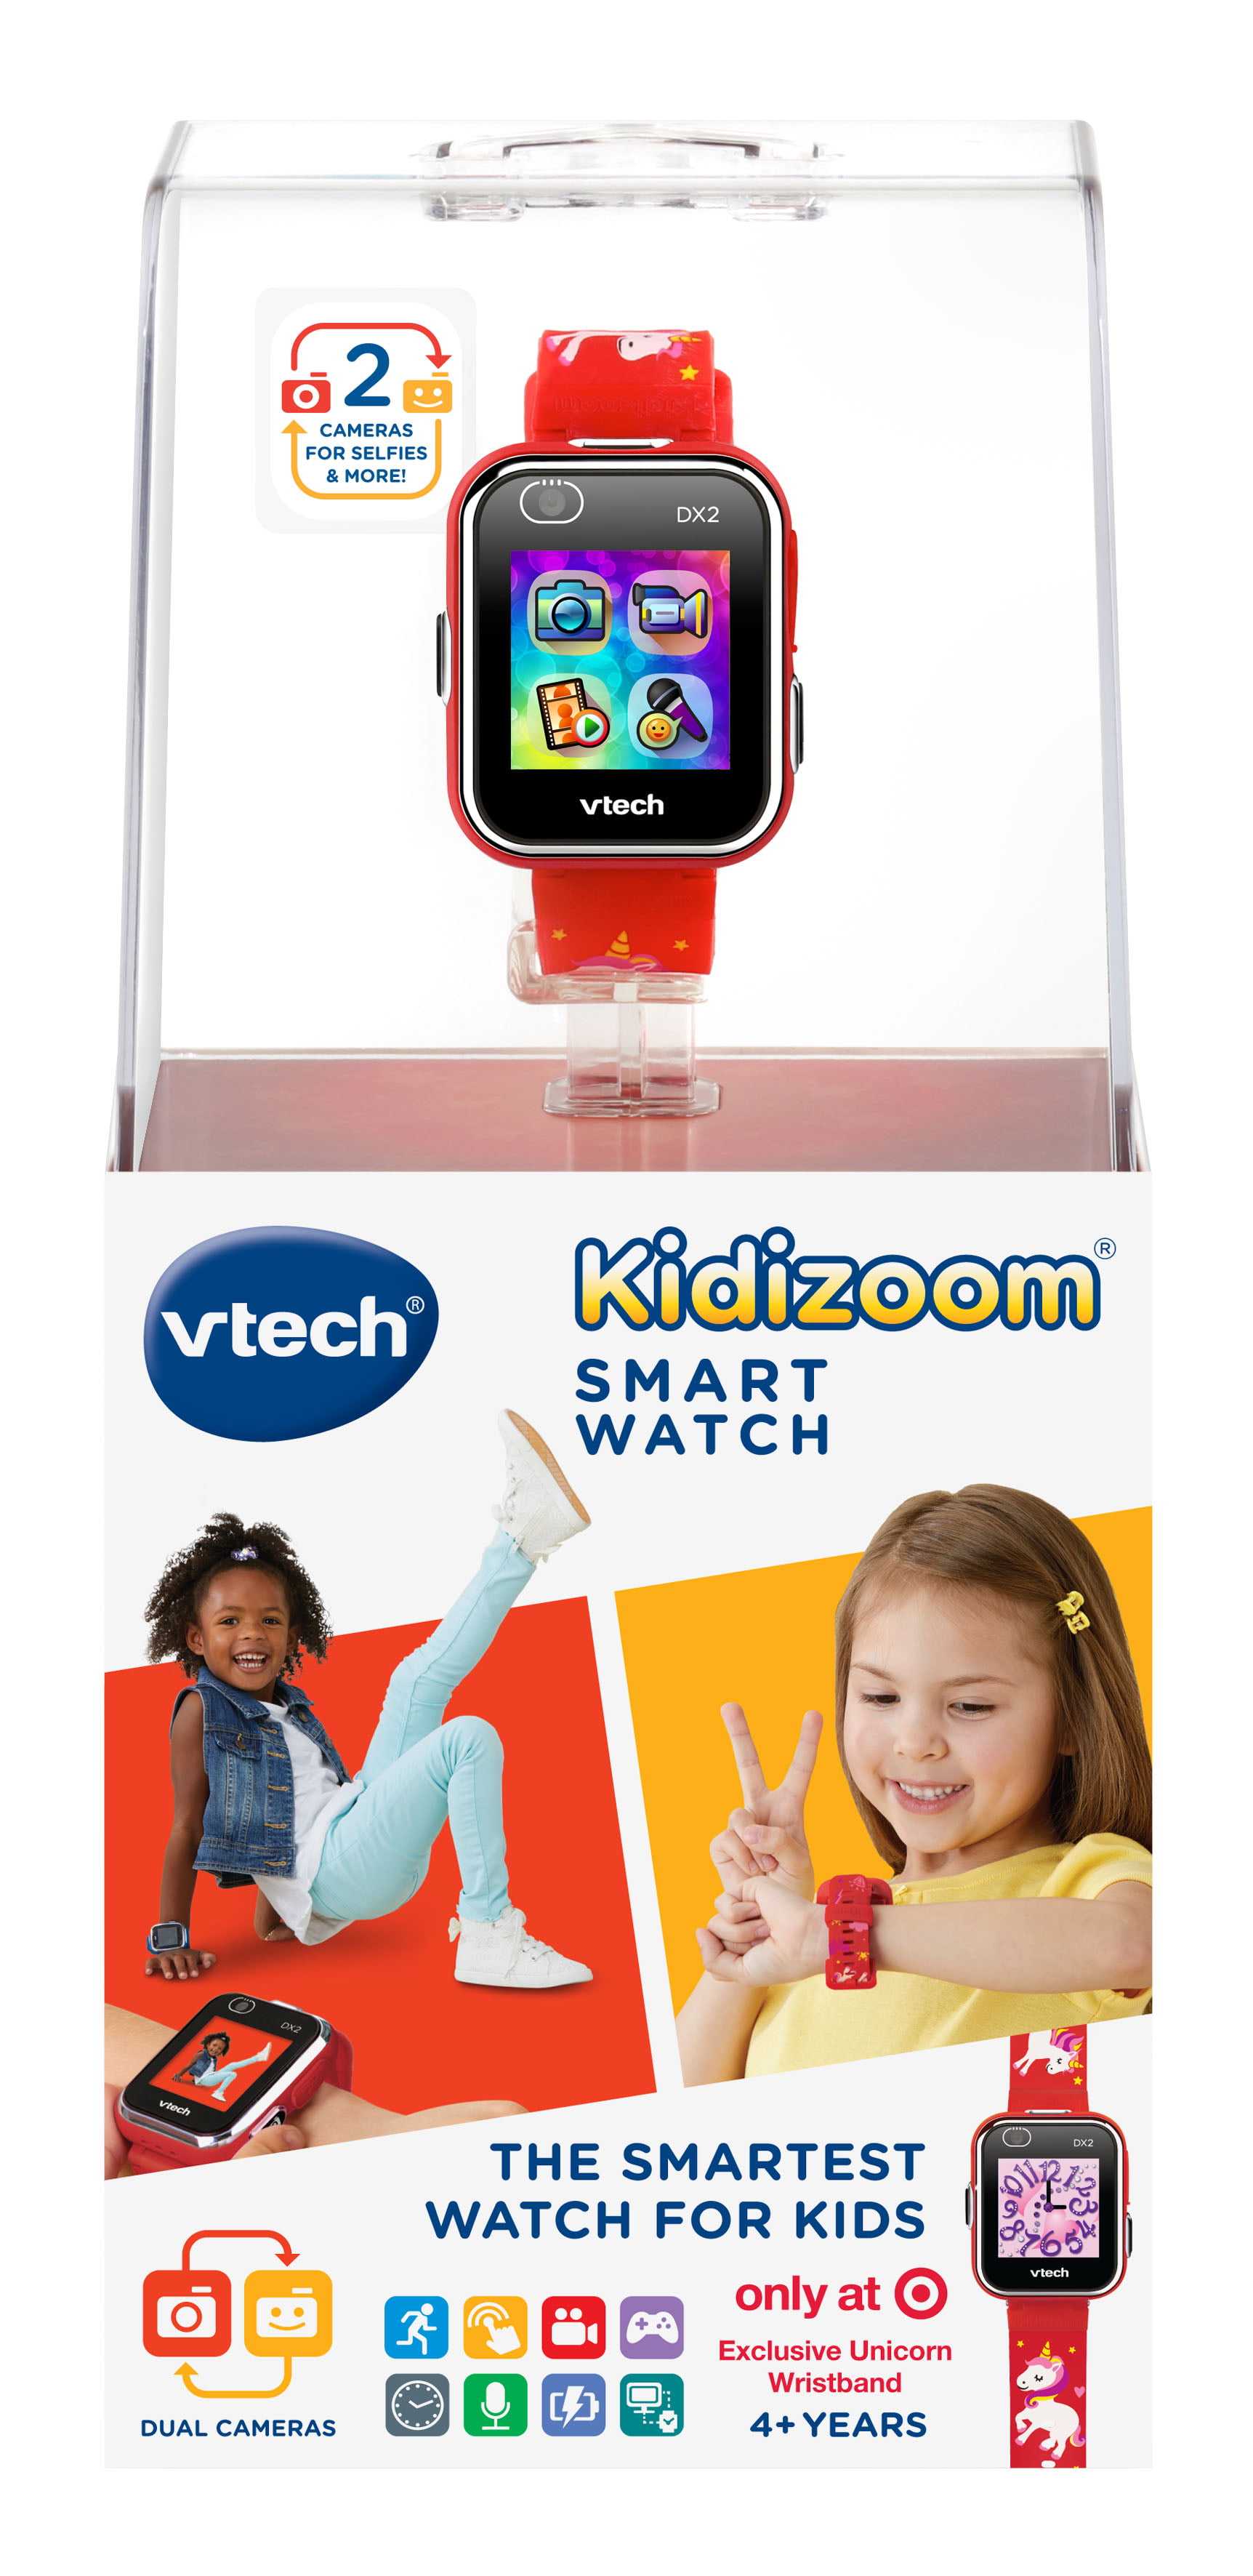 VTech Kidizoom Smartwatch DX2 Special Exclusive Red Unicorn Edition NEW IN BOX! 